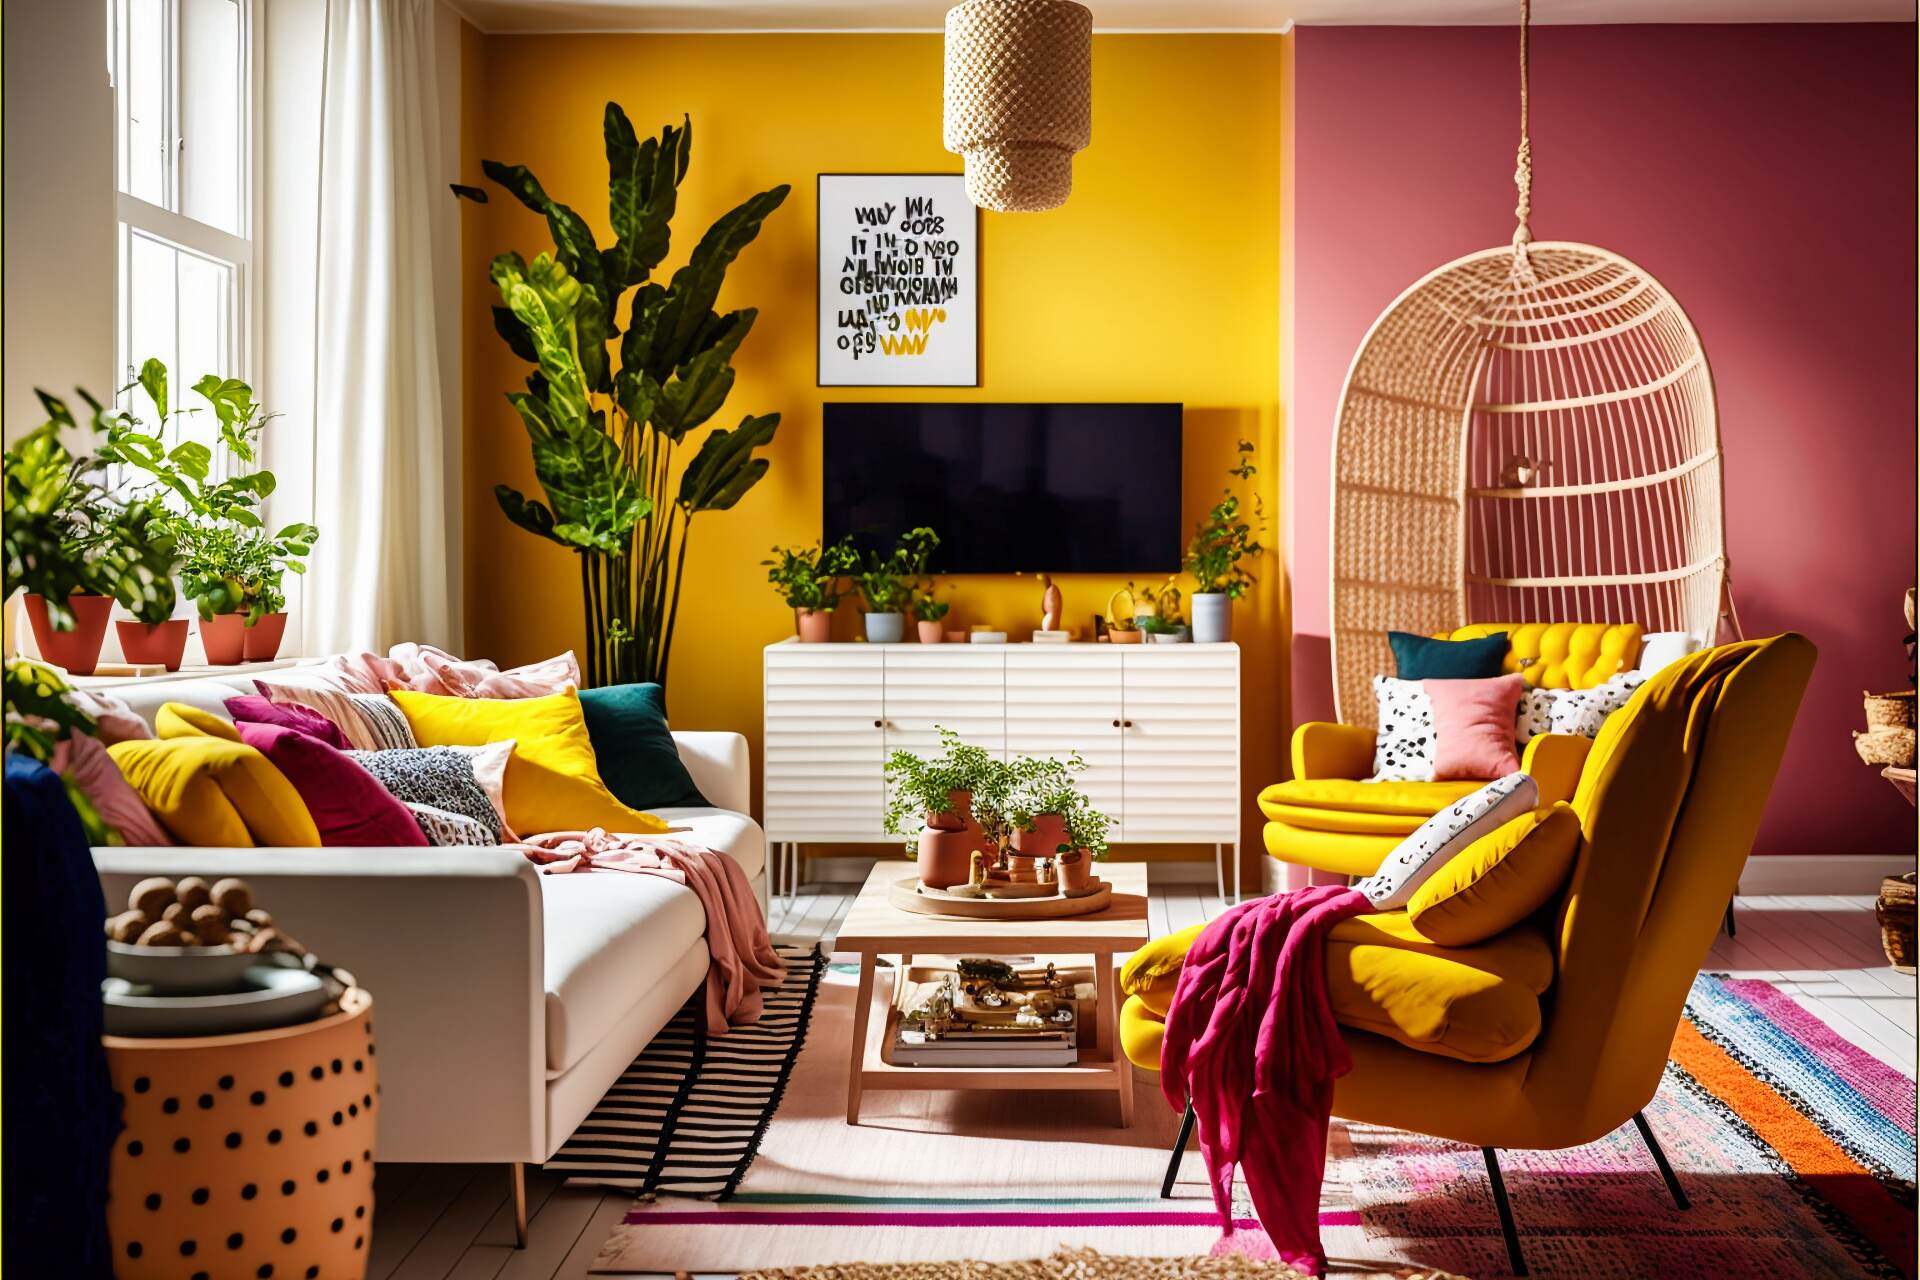 Bright Boho Living Room - Sunshine Yellow And Bright White Combine To Create A Cheerful Atmosphere In This Maximalist Living Room. An Inviting White Linen Sofa Is Accompanied By Two Fuzzy Pink Armchairs For A Vibrant Boost. A Boho-Style Woven Rug Brings In Texture And A Natural Element, While A Bright Yellow Wall-Mounted Tv Adds A Hint Of Contrast. Plants, Candles, Books, And Artwork Create A Lively, Eclectic Feel.